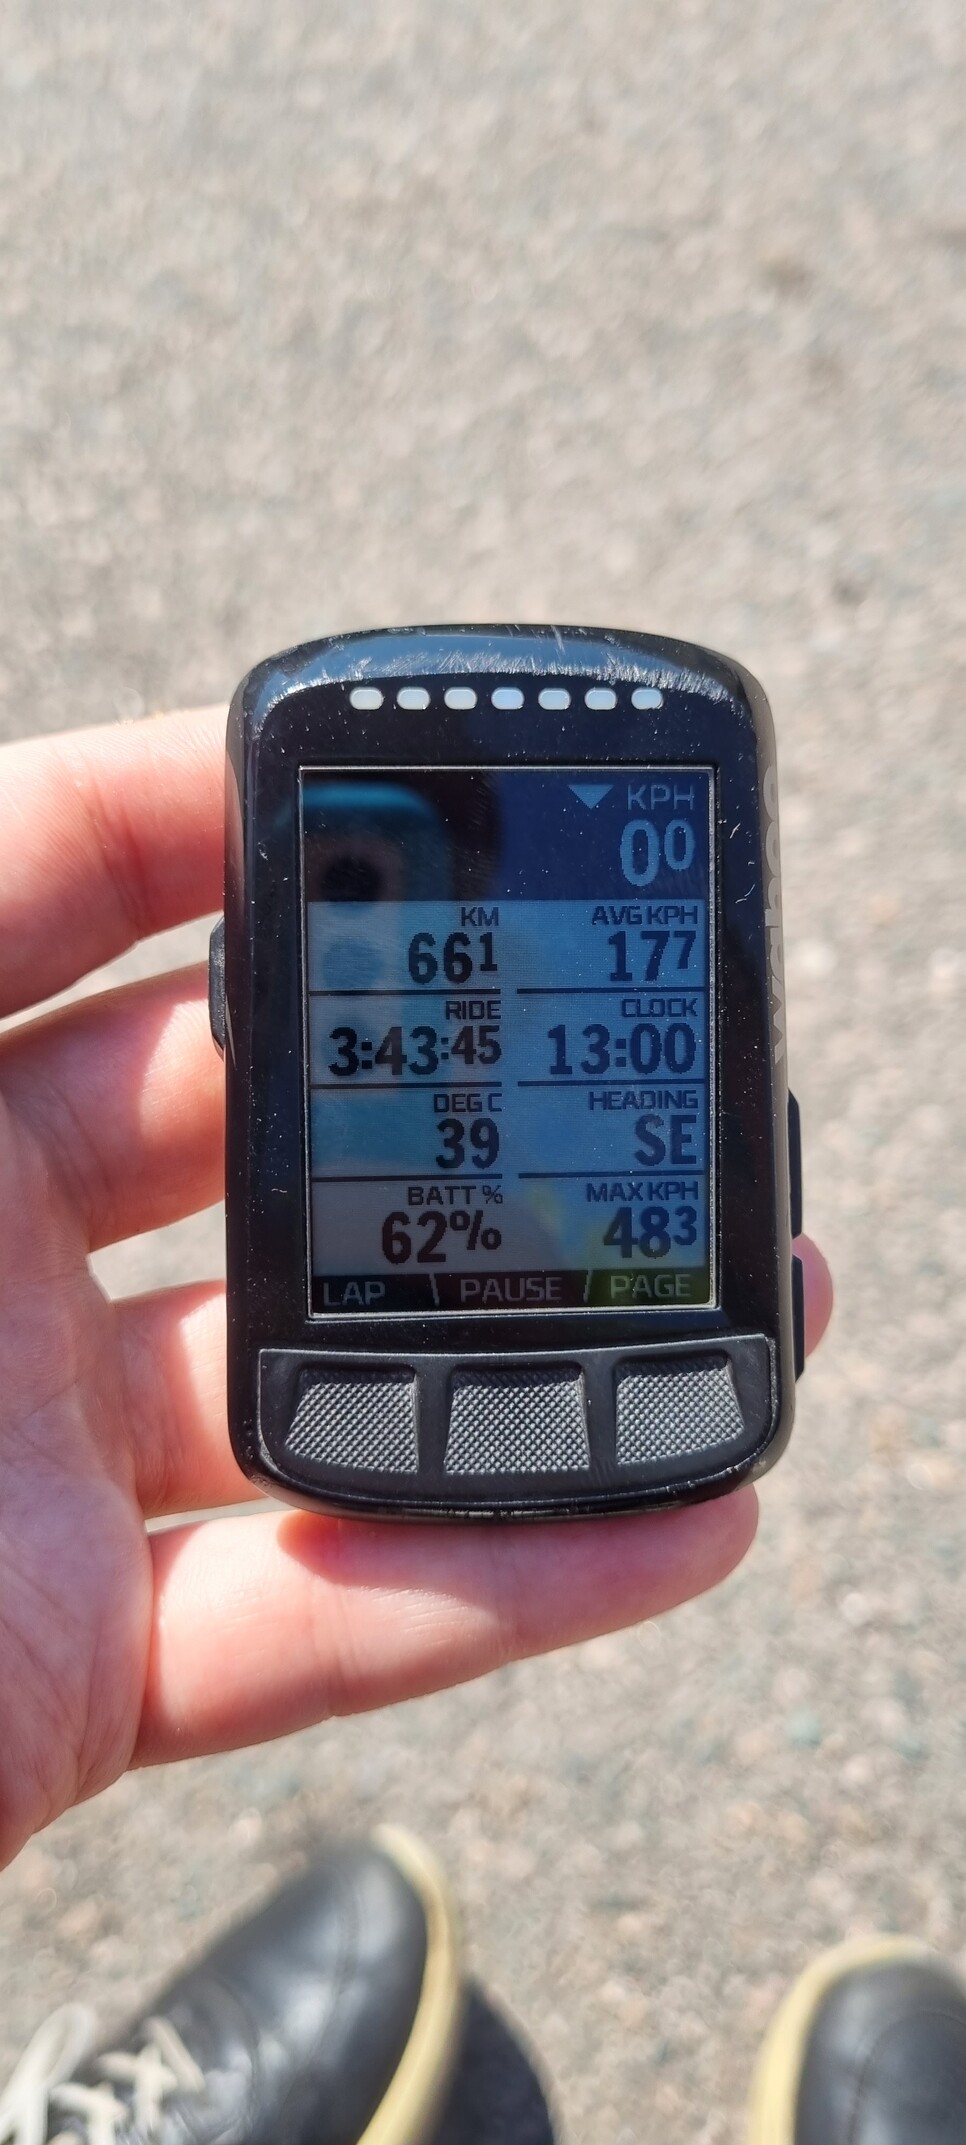 It's a bike computer in my hand. It says I've gone 66km in about 3 hours 45 minutes. It also says 39°C but it's sitting in the sun. To be fair tho, I'm riding in the sun too 🤔